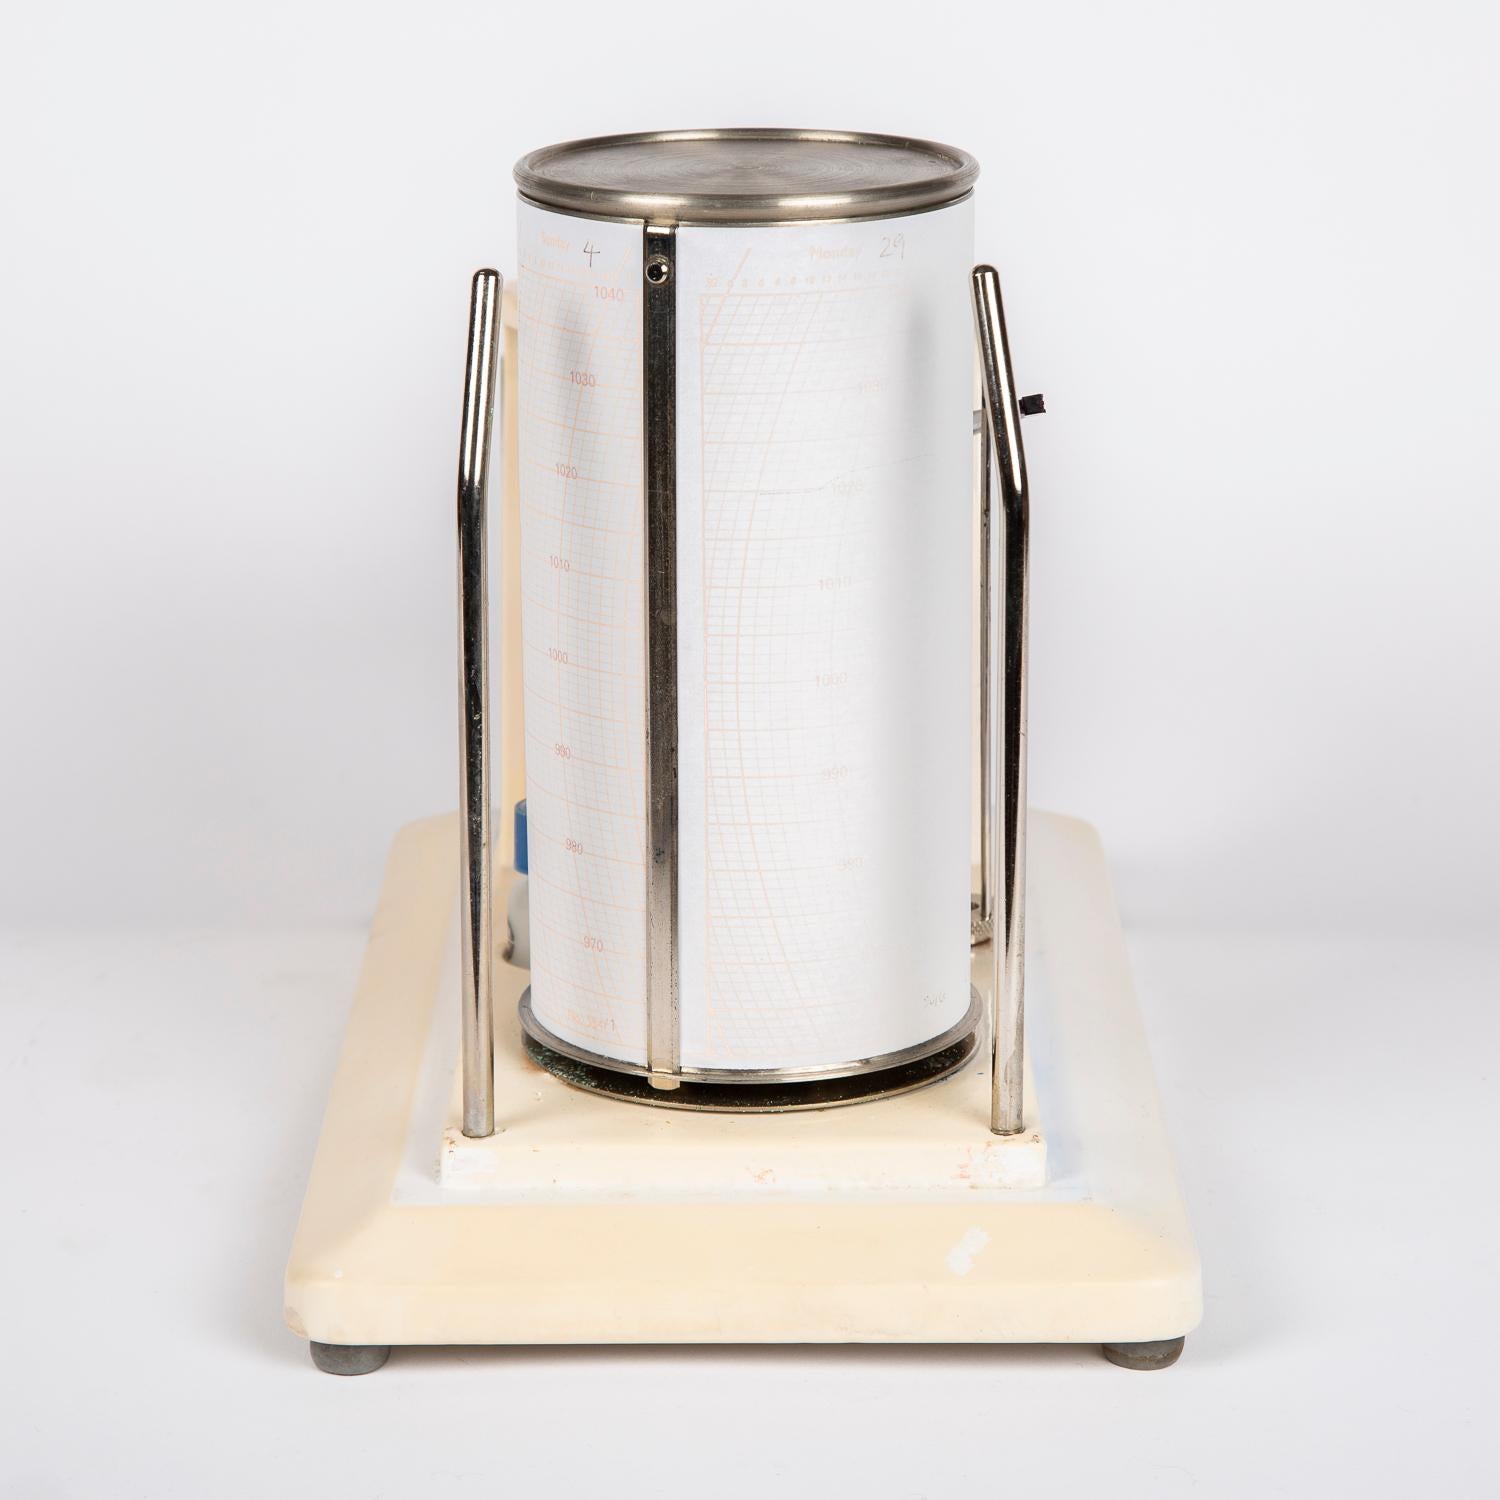 English Open Scale Barograph by C F Casella & Co of London For Sale